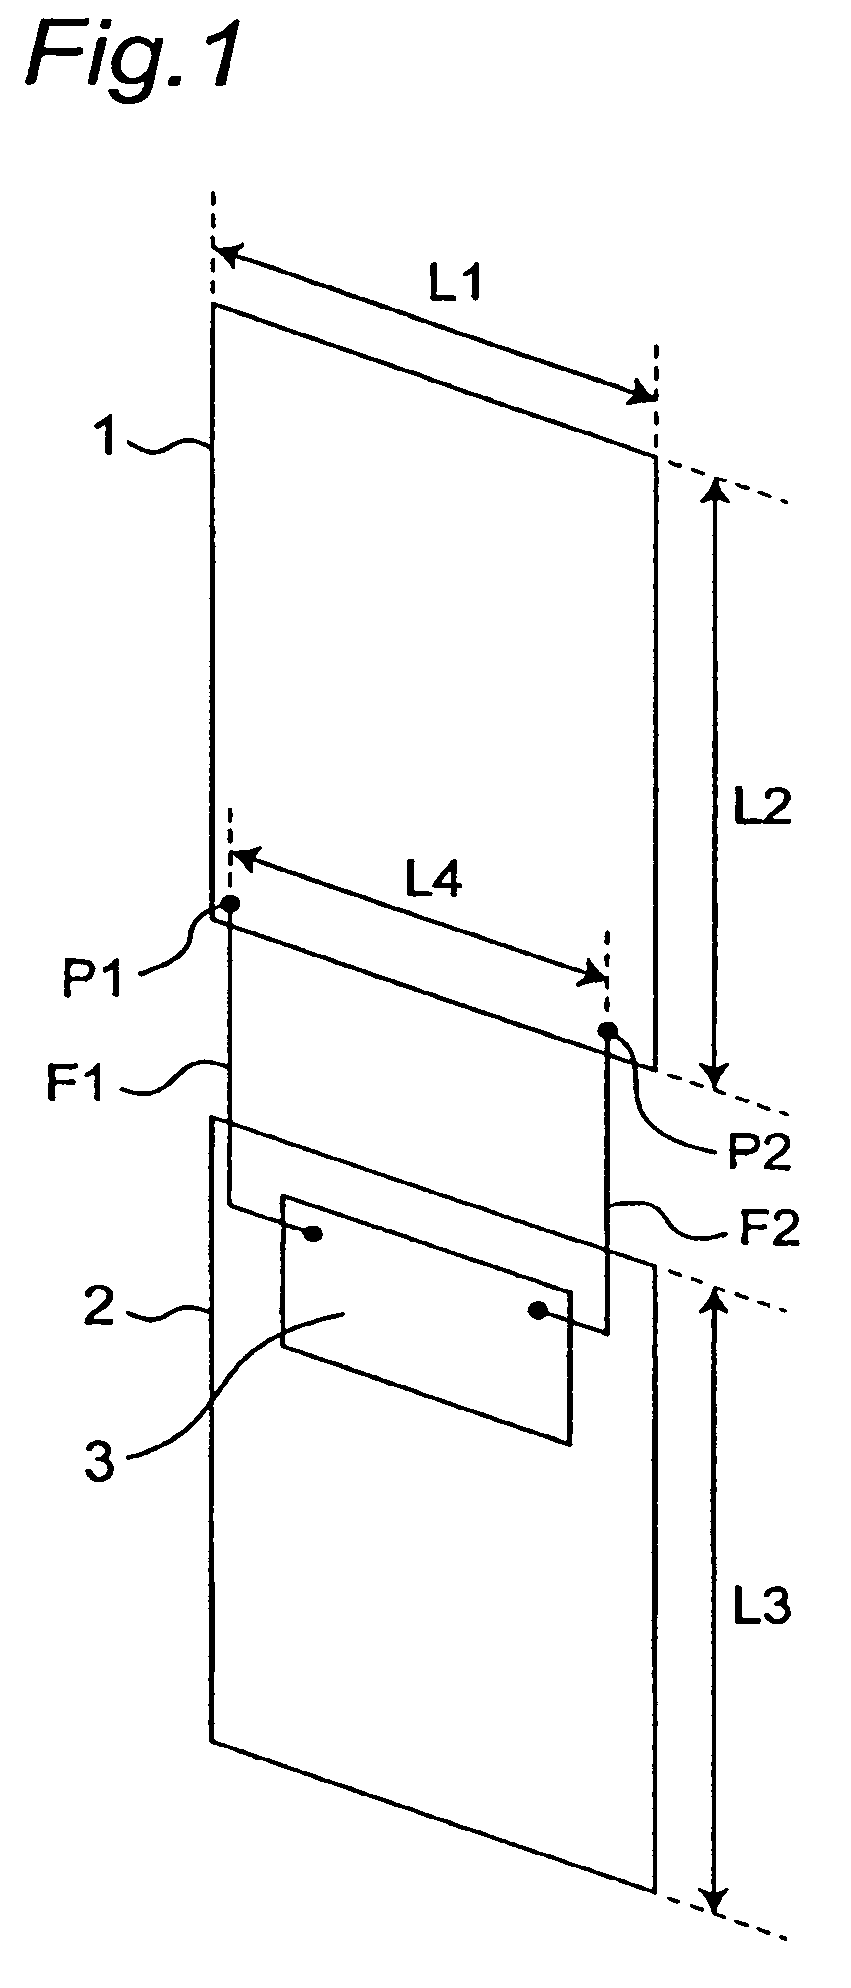 Antenna apparatus provided with antenna element excited through multiple feeding points